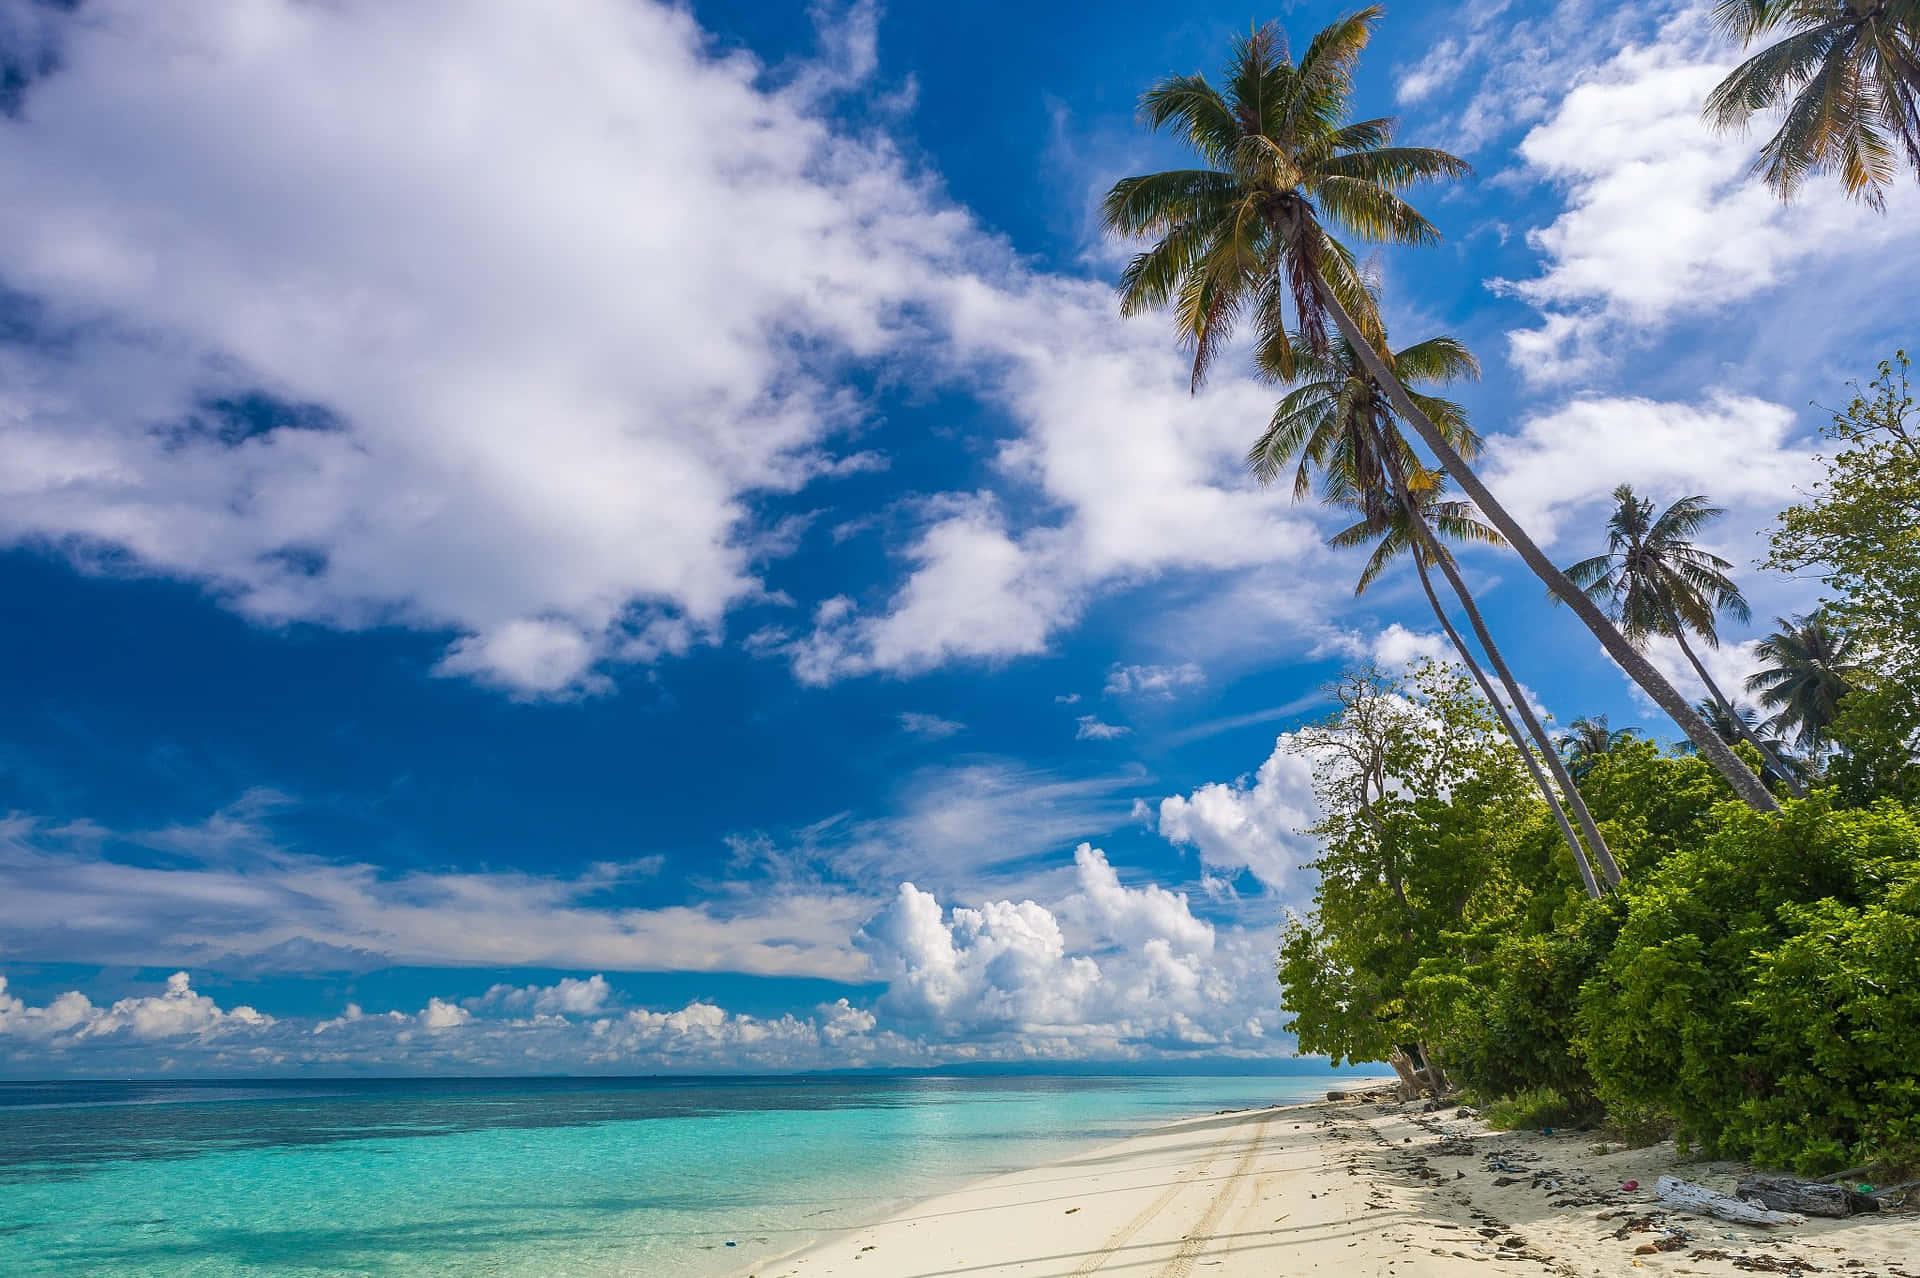 A Beach With Palm Trees And Blue Sky